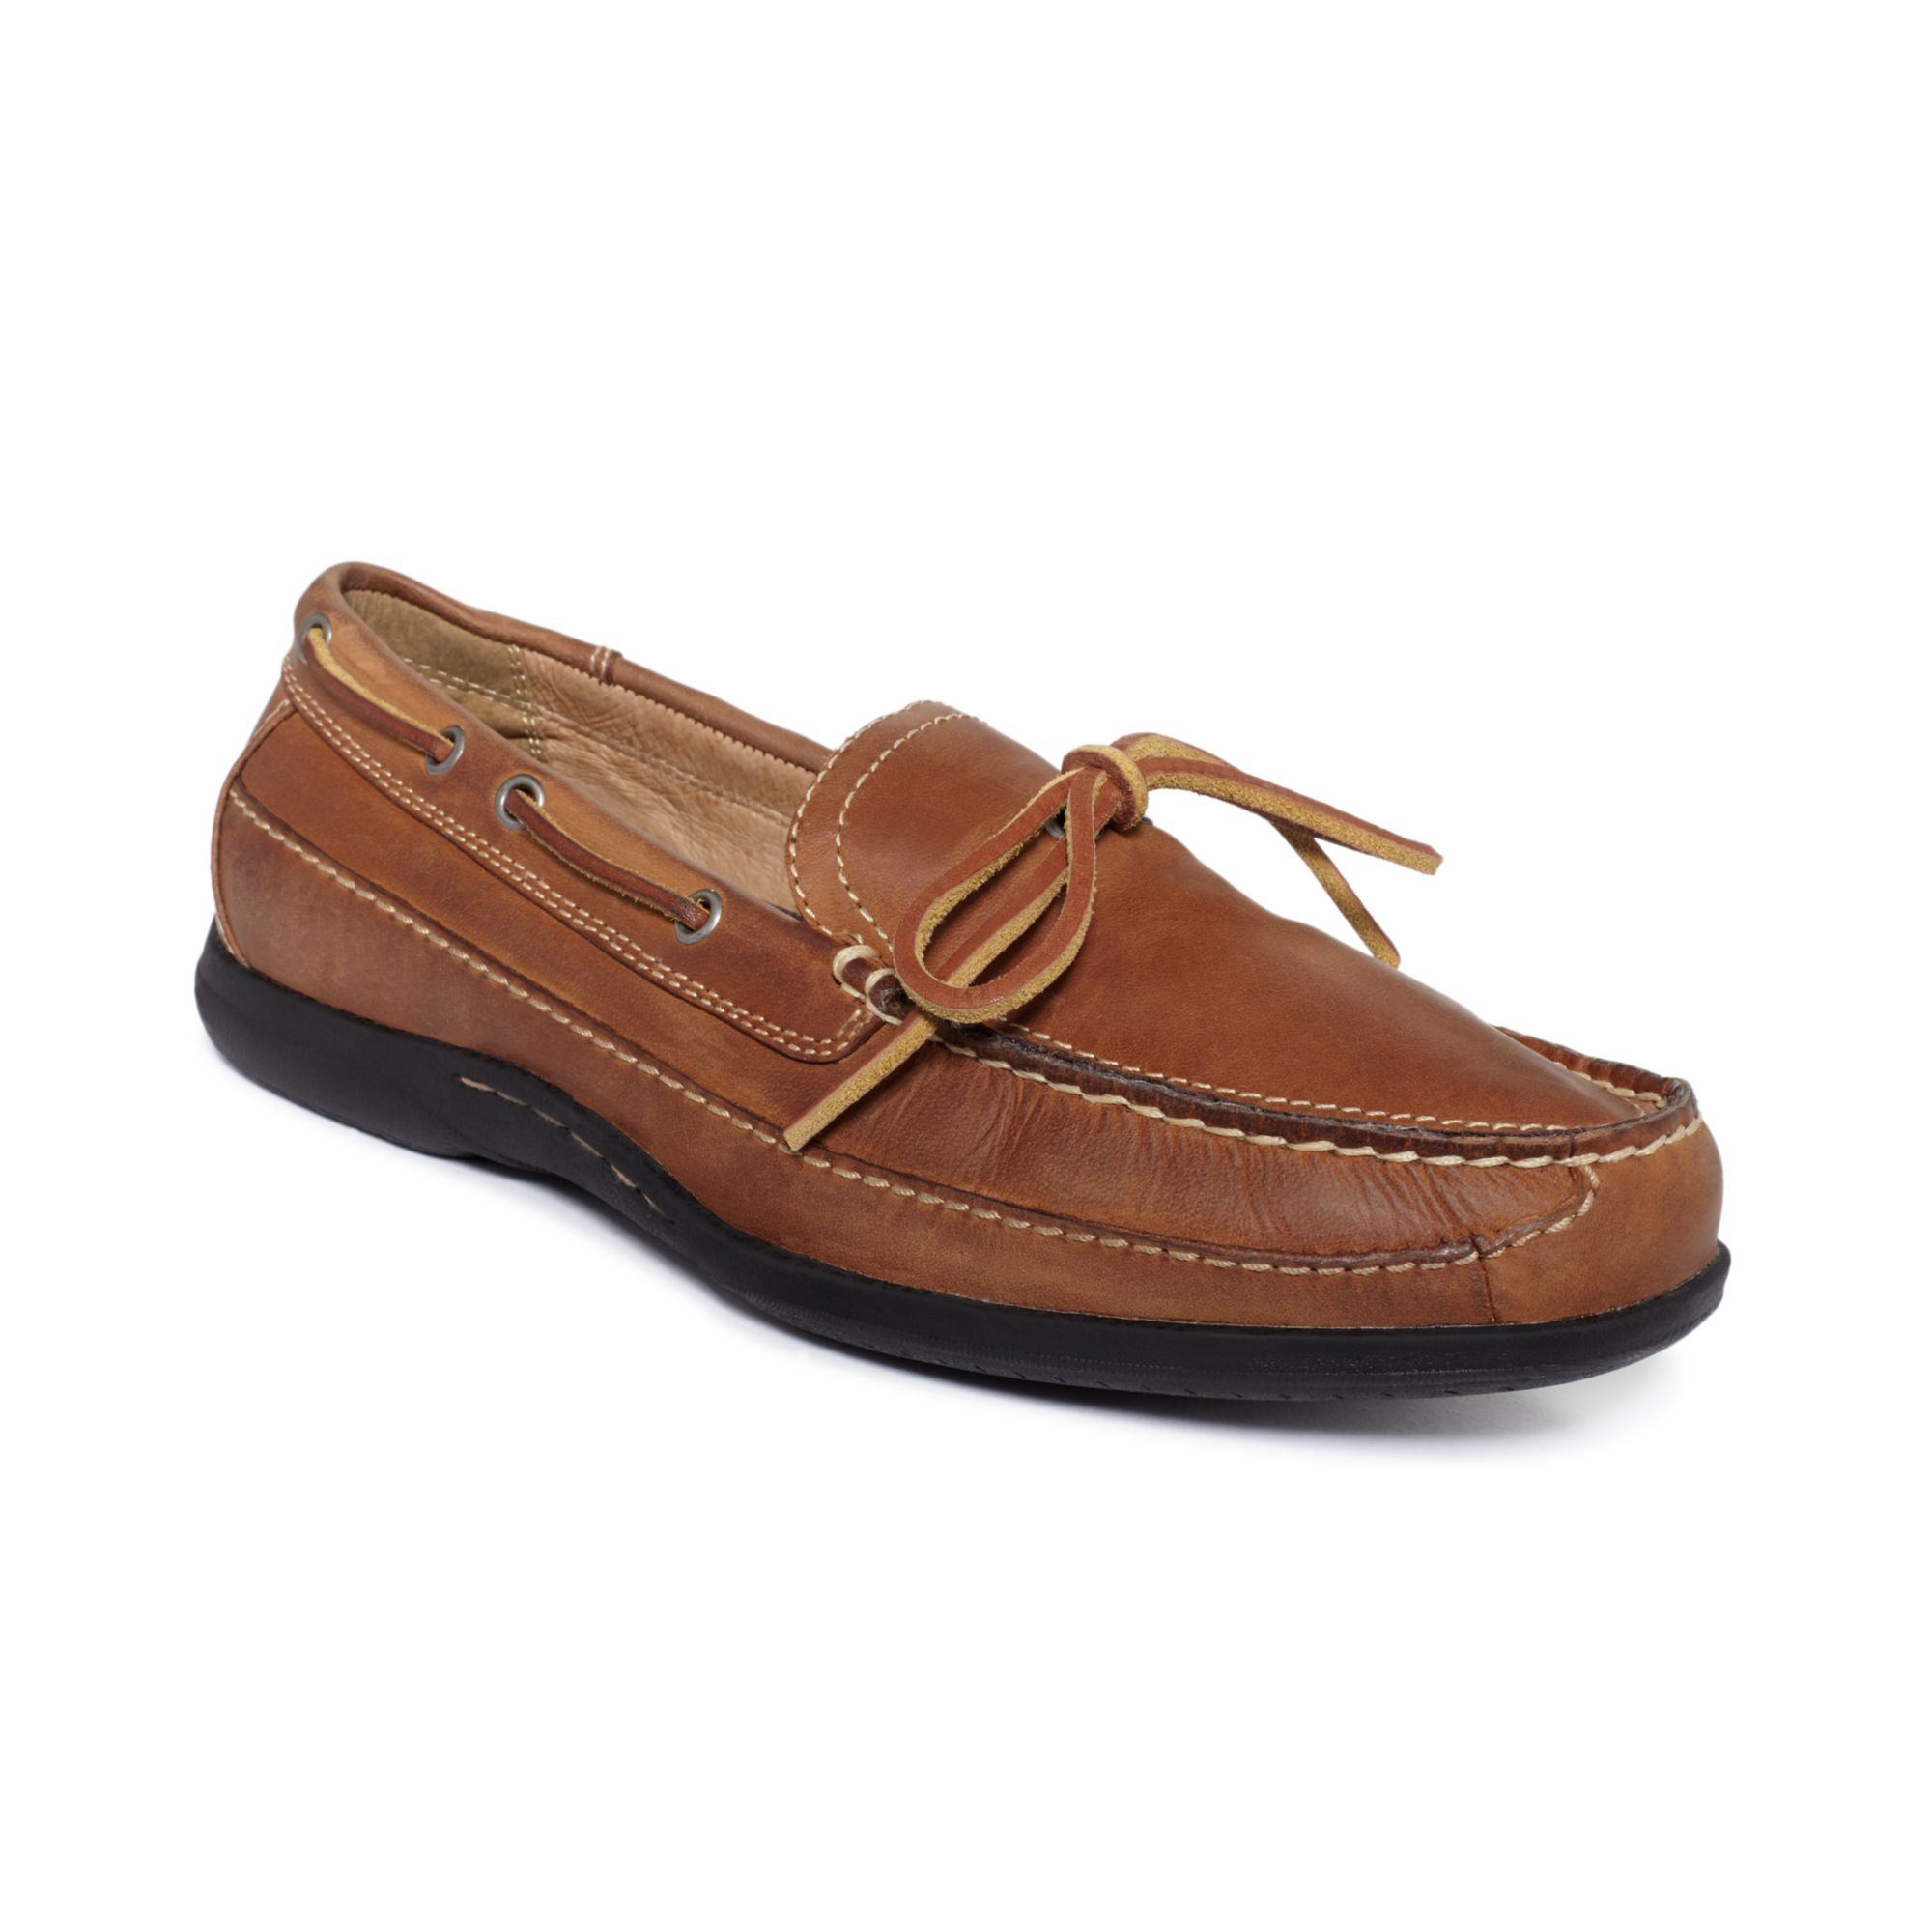 johnston and murphy boat shoes